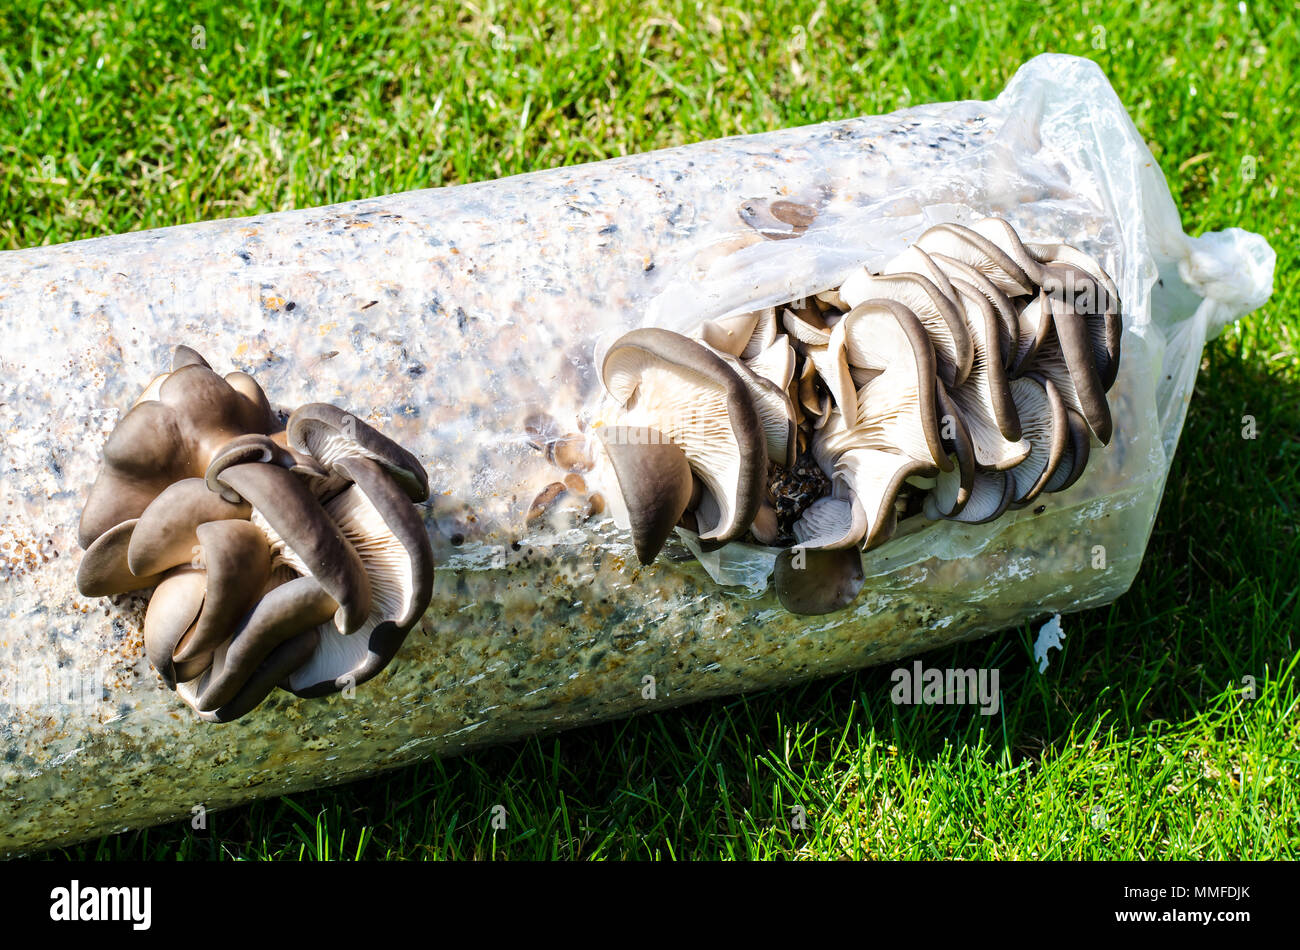 Cultivation of oyster mushrooms on substrate. Studio Photo Stock Photo